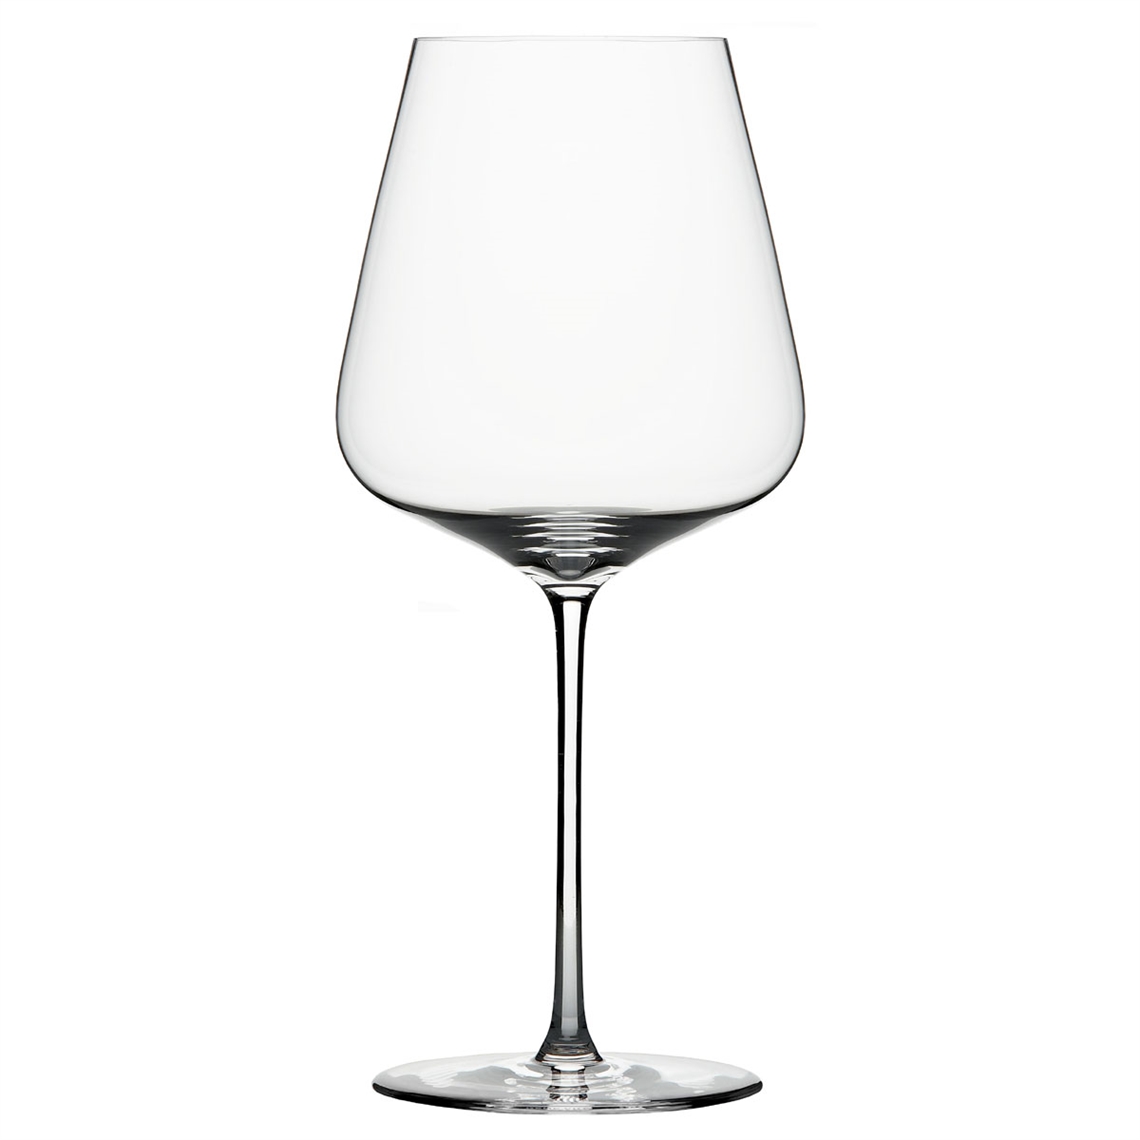 View more riedel extreme from our Premium Mouth Blown Glassware range